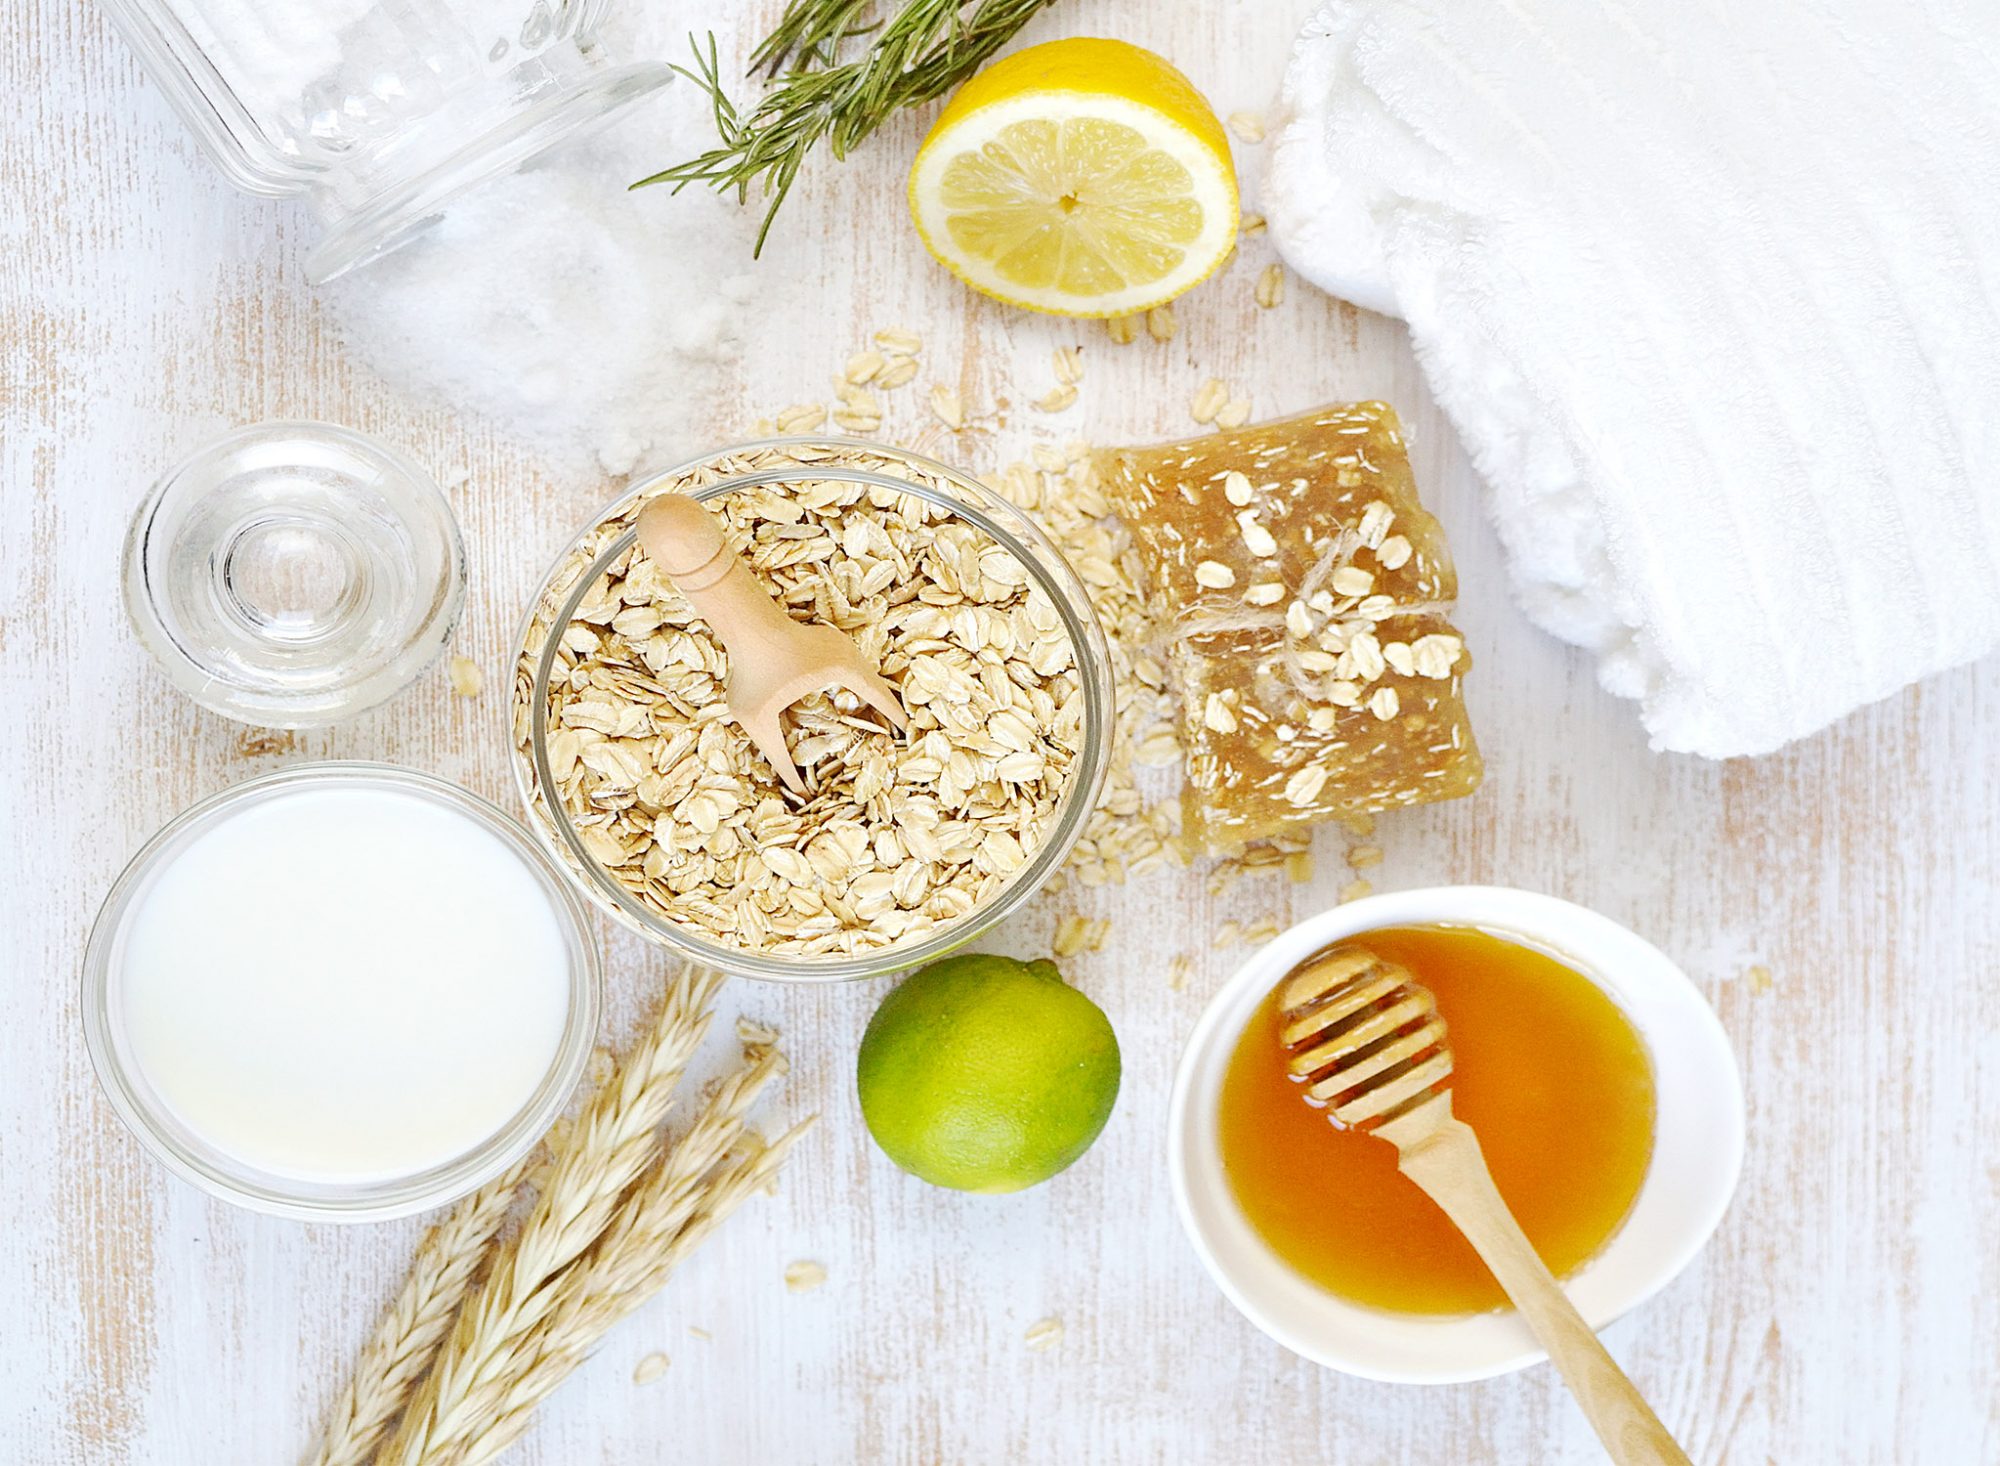 An image of the ingredients for an oatmeal bath.